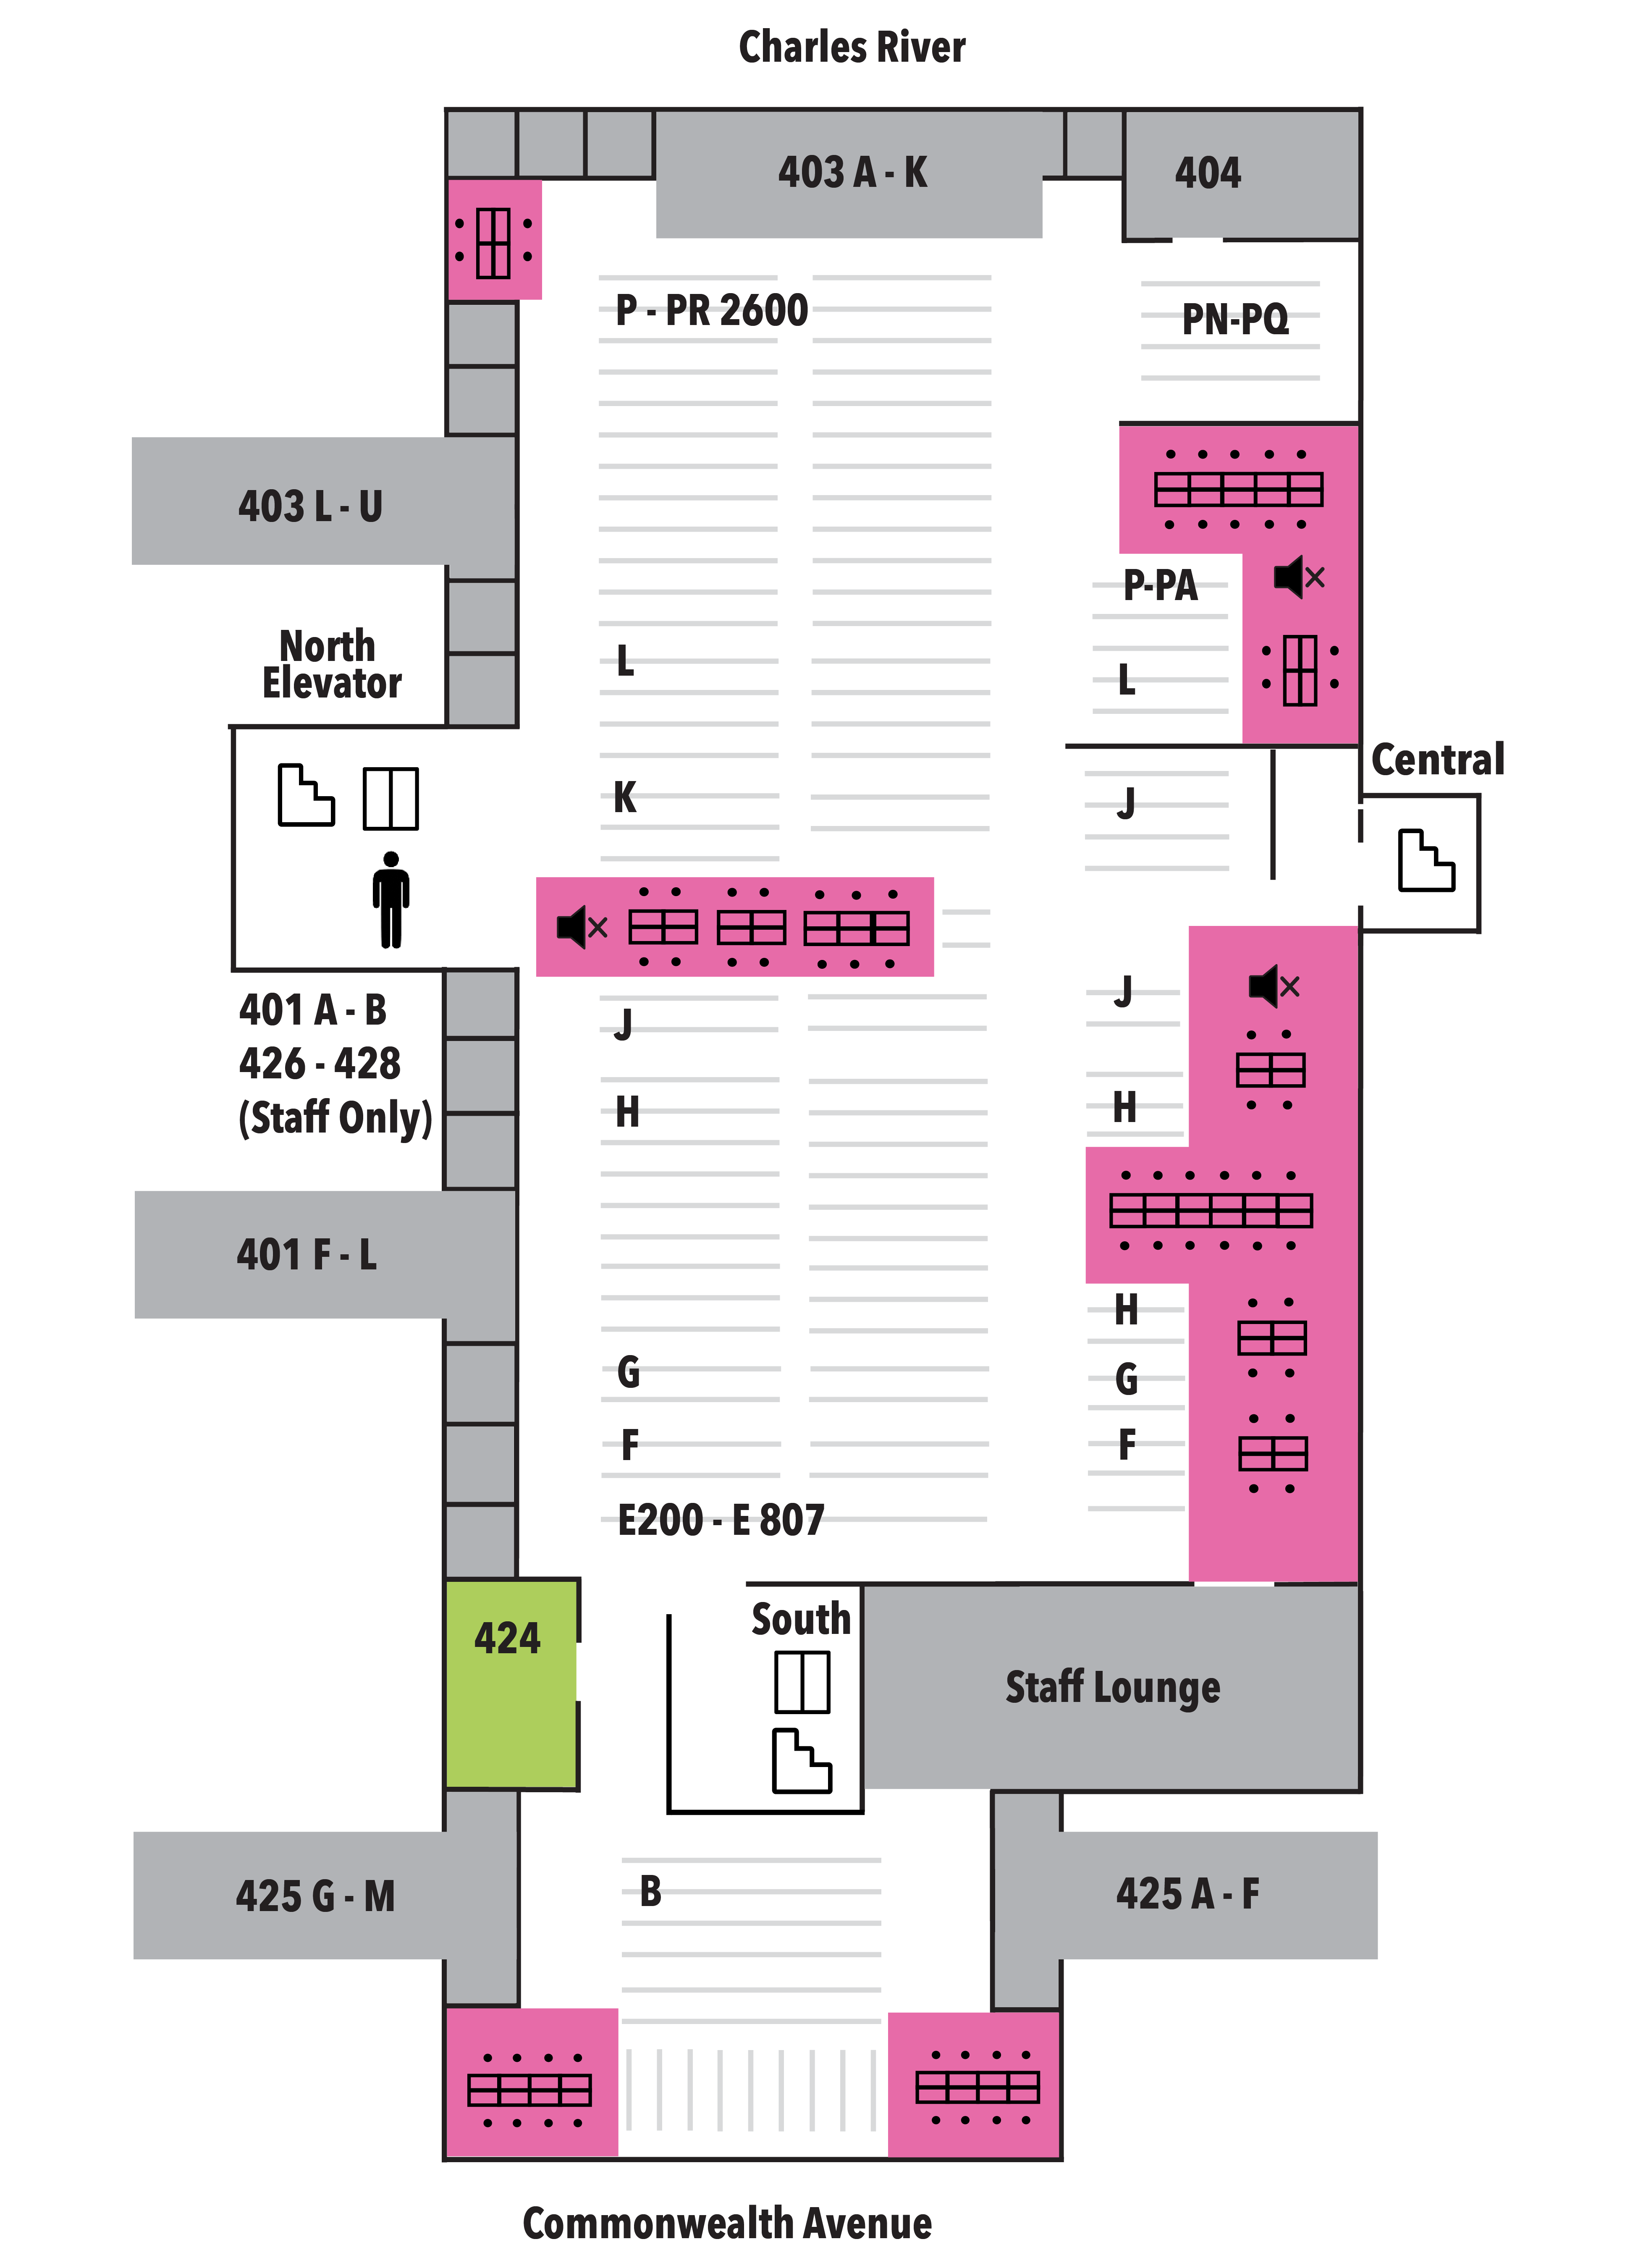 diagram showing the layout of the fourth floor of the Mugar Memorial Library